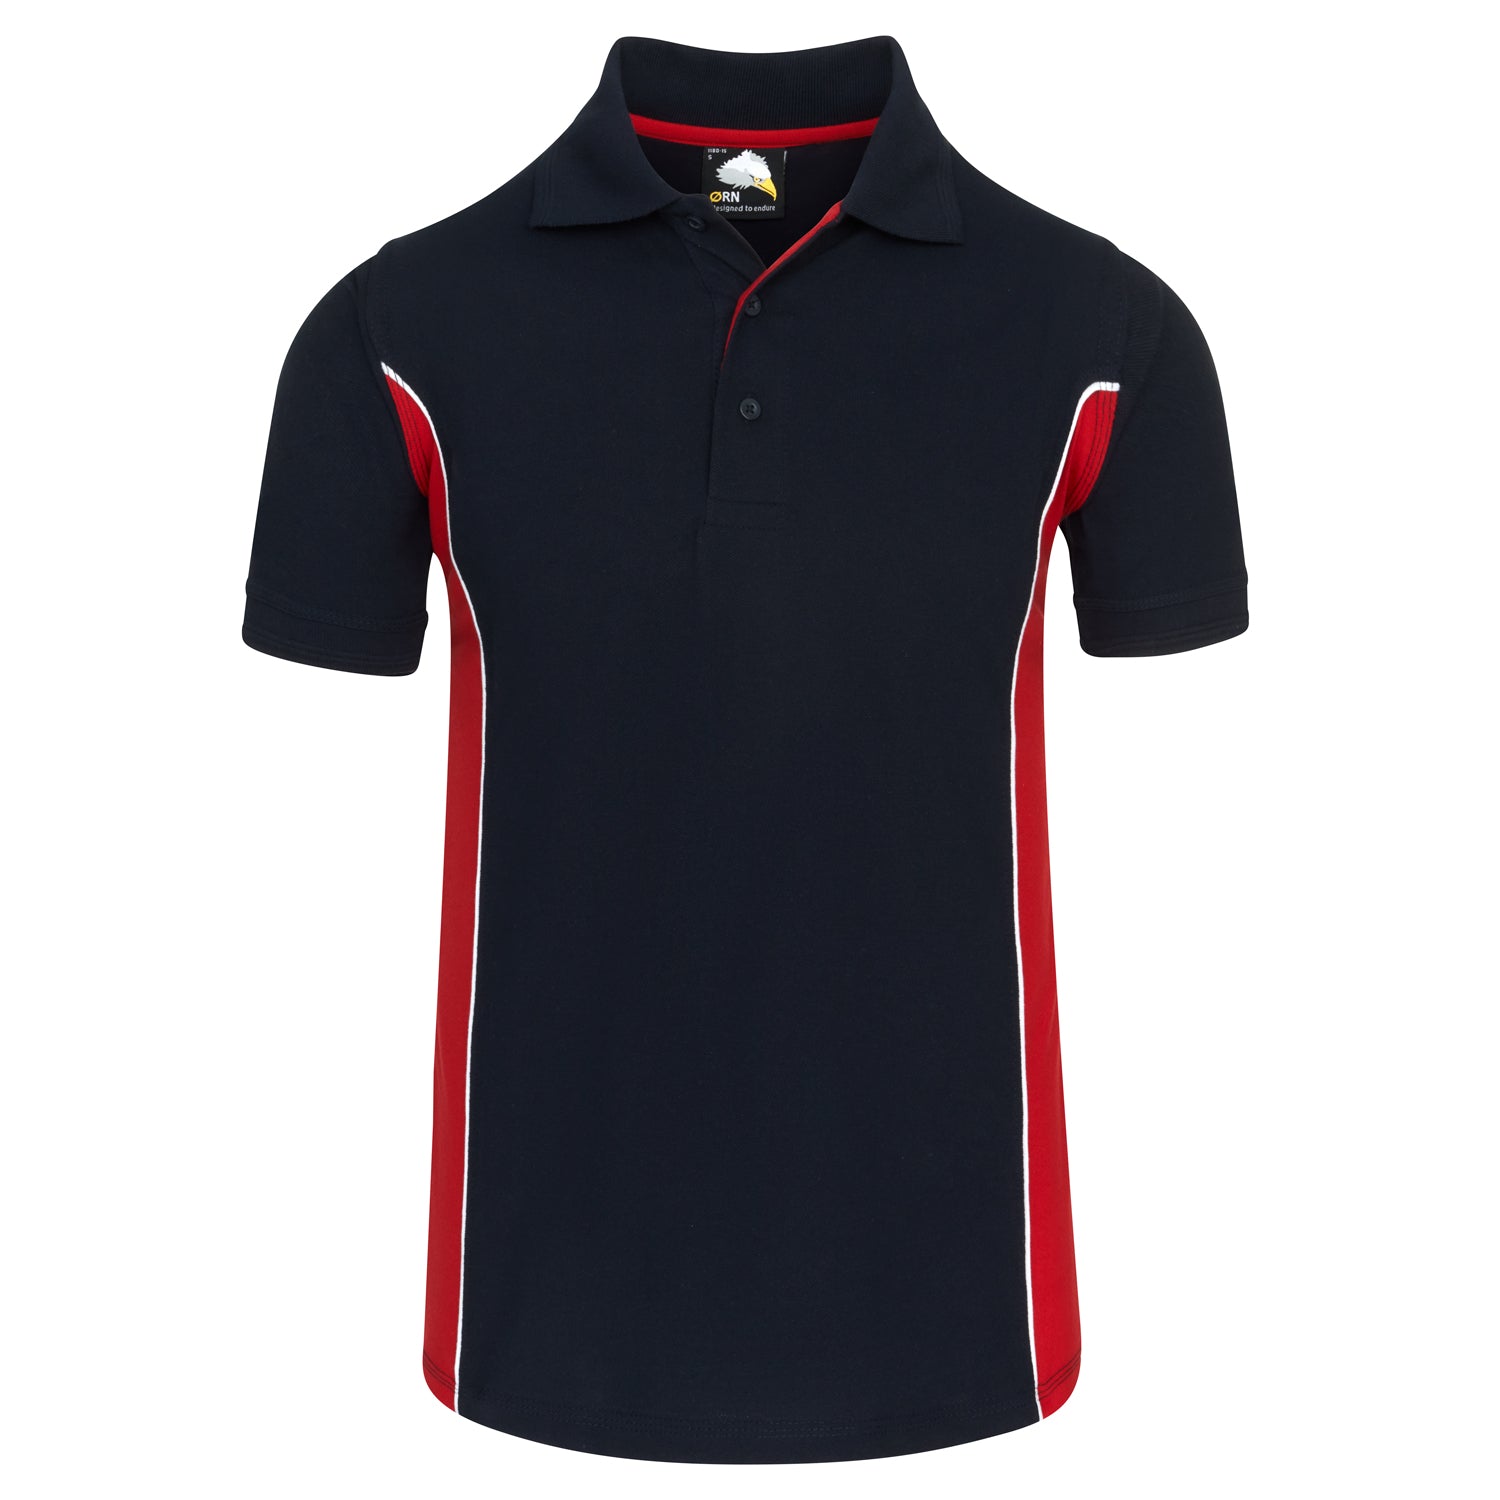 ORN Silverswift Two Tone Workwear Polo Shirt - Navy/Red